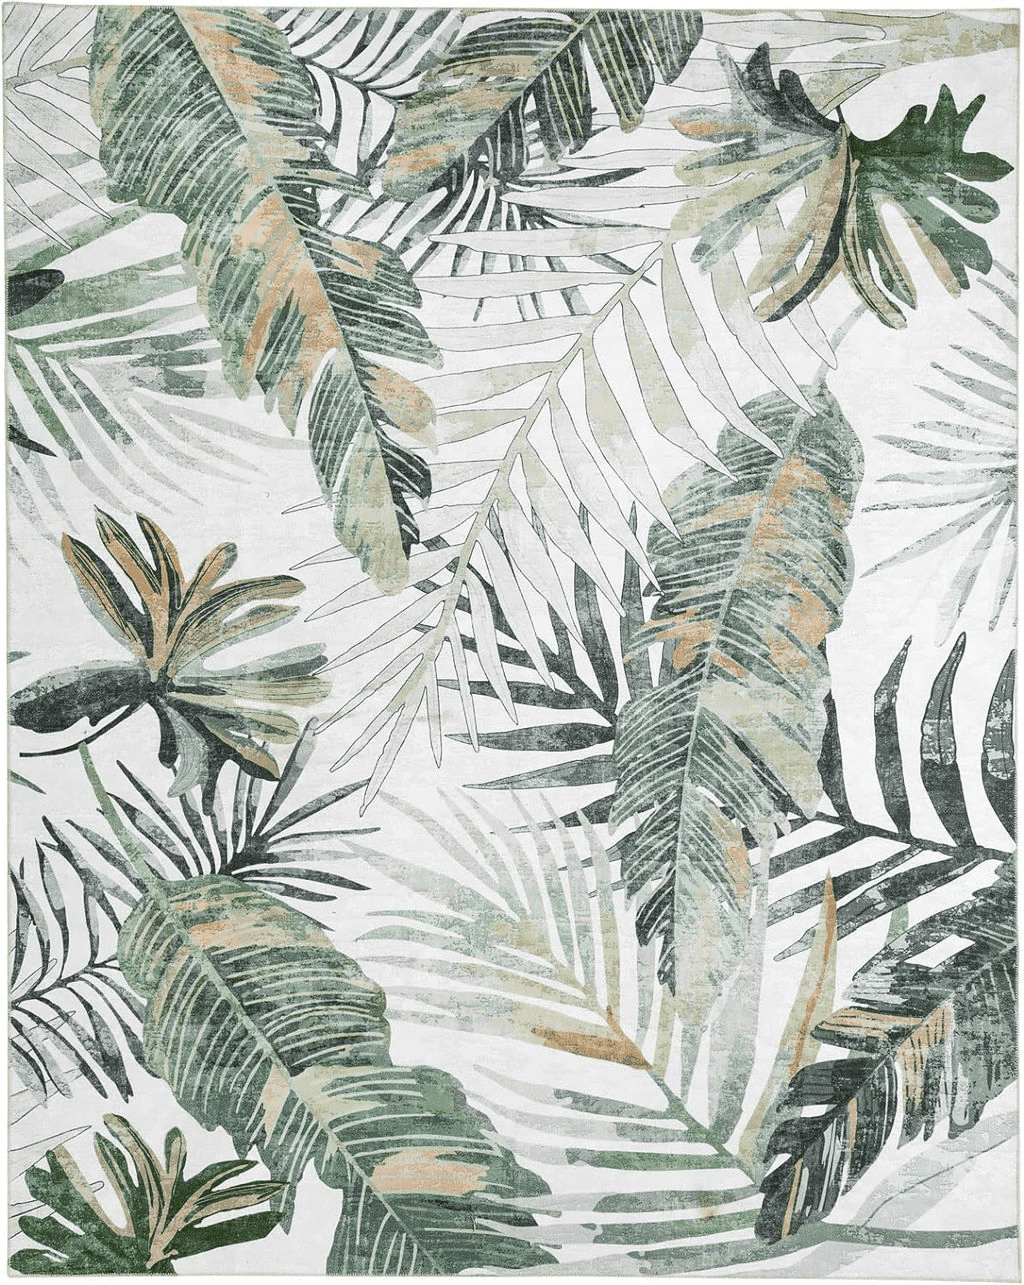 Area Grey DECOMALL Jasmine Washable Area Rugs 8x10ft, Tropical Plant Non Slip Rug, Soft and Thin Large Carpet for Living Room Bedroom,8x10ft Green/Multi